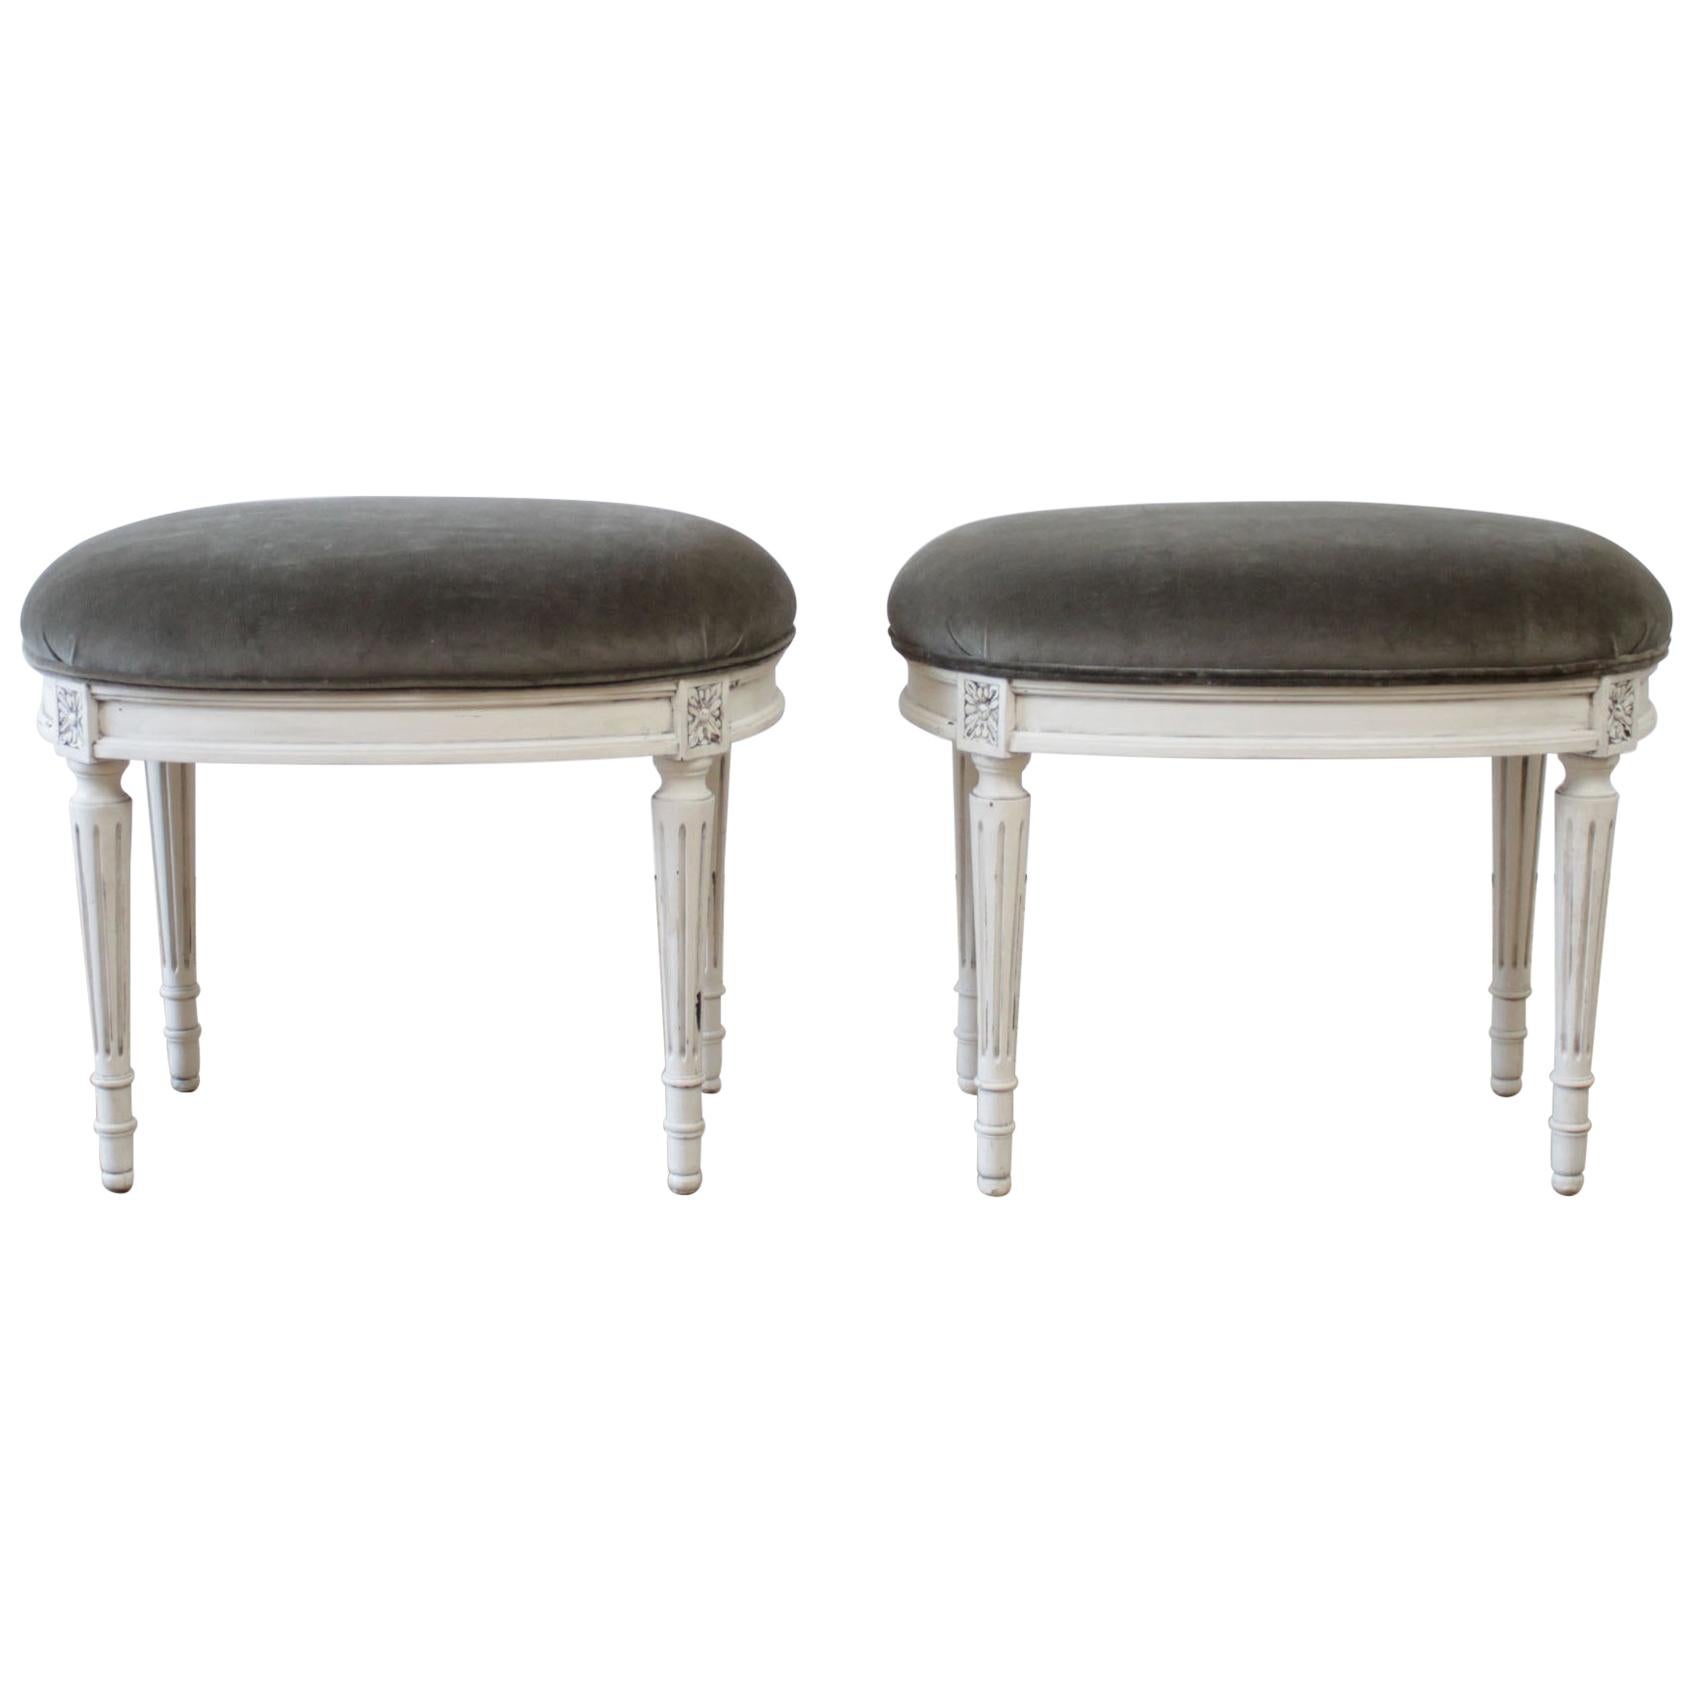 Pair of 20th Century Louis XVI Style Painted and Velvet Upholstered Ottomans